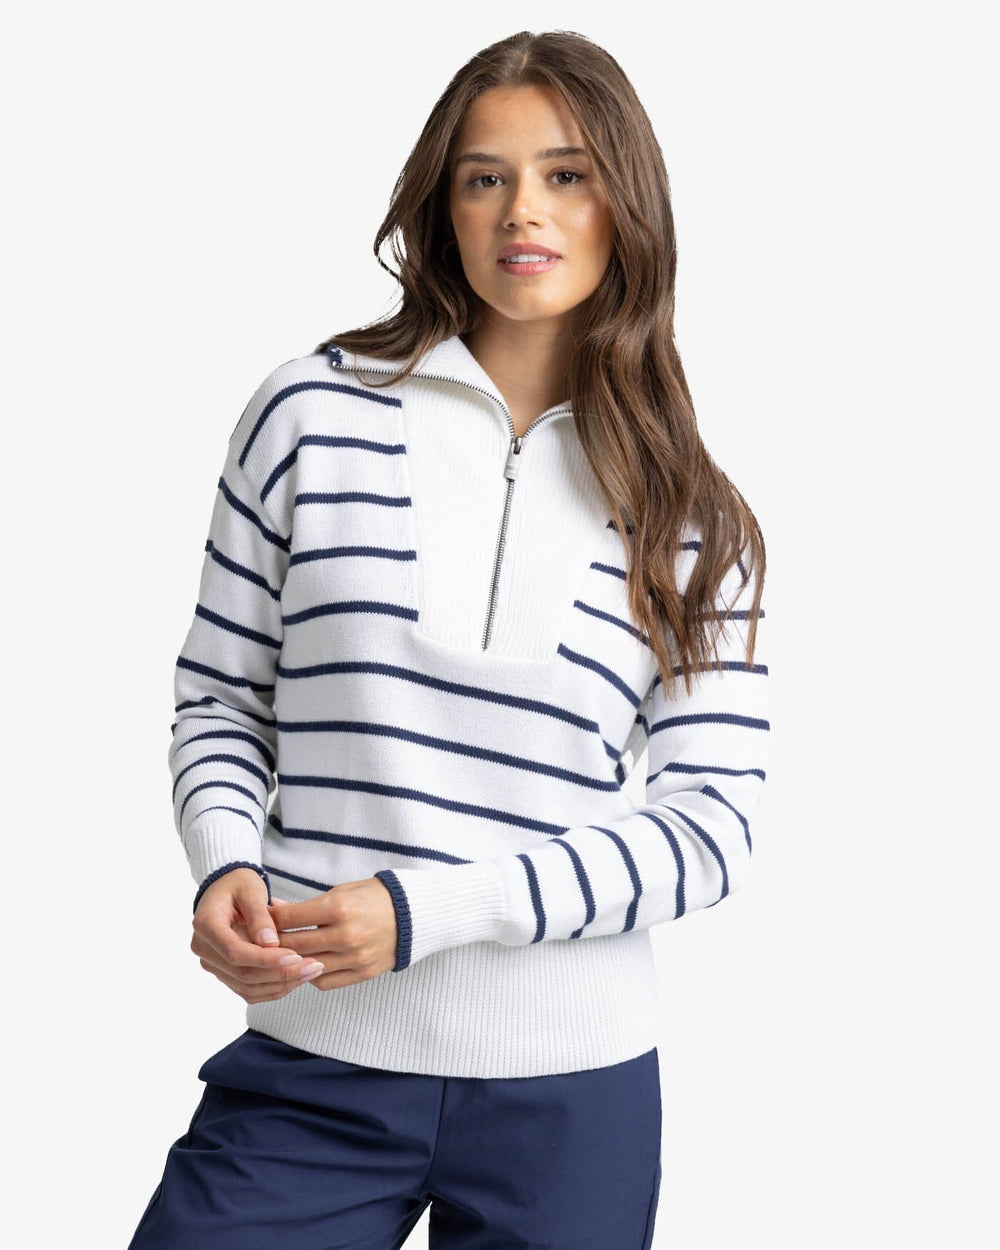 The front view of the Southern Tide Maizy Sweater by Southern Tide - Nautical Navy